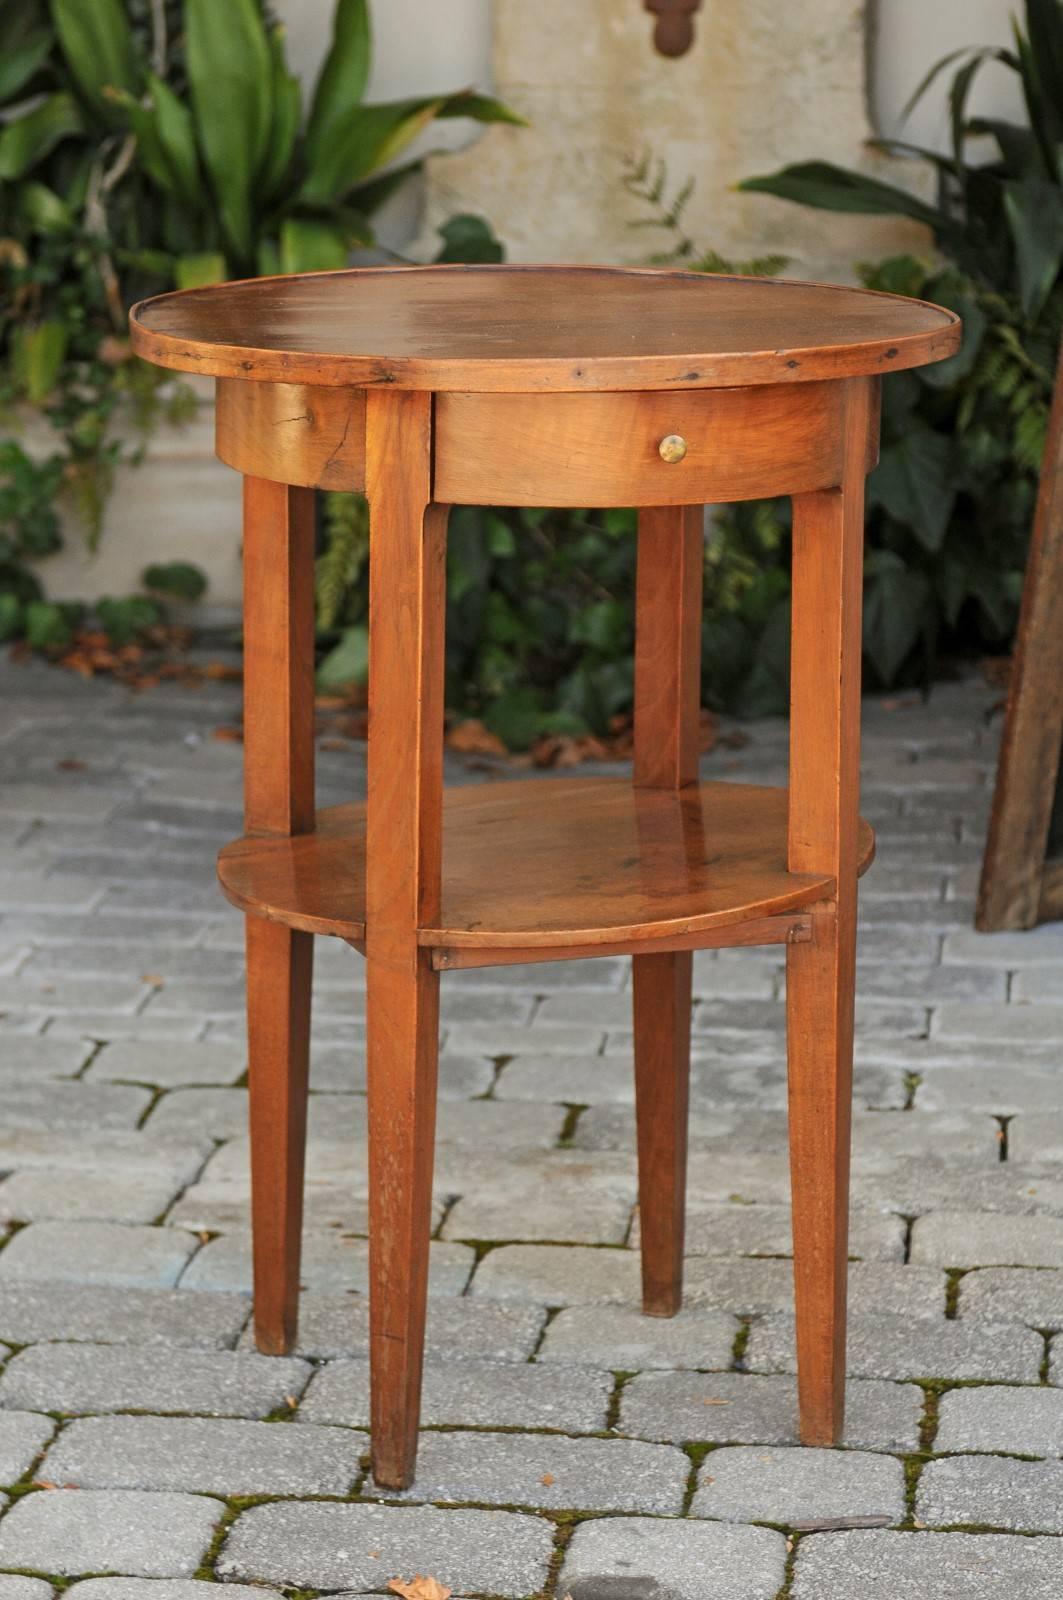 A French two-tiered side round side table with single drawer and tapered legs from the mid 19th century. This French side table was born in the 1840s, during the reign of Louis-Philippe, the last king of France. Featuring a circular top, the apron